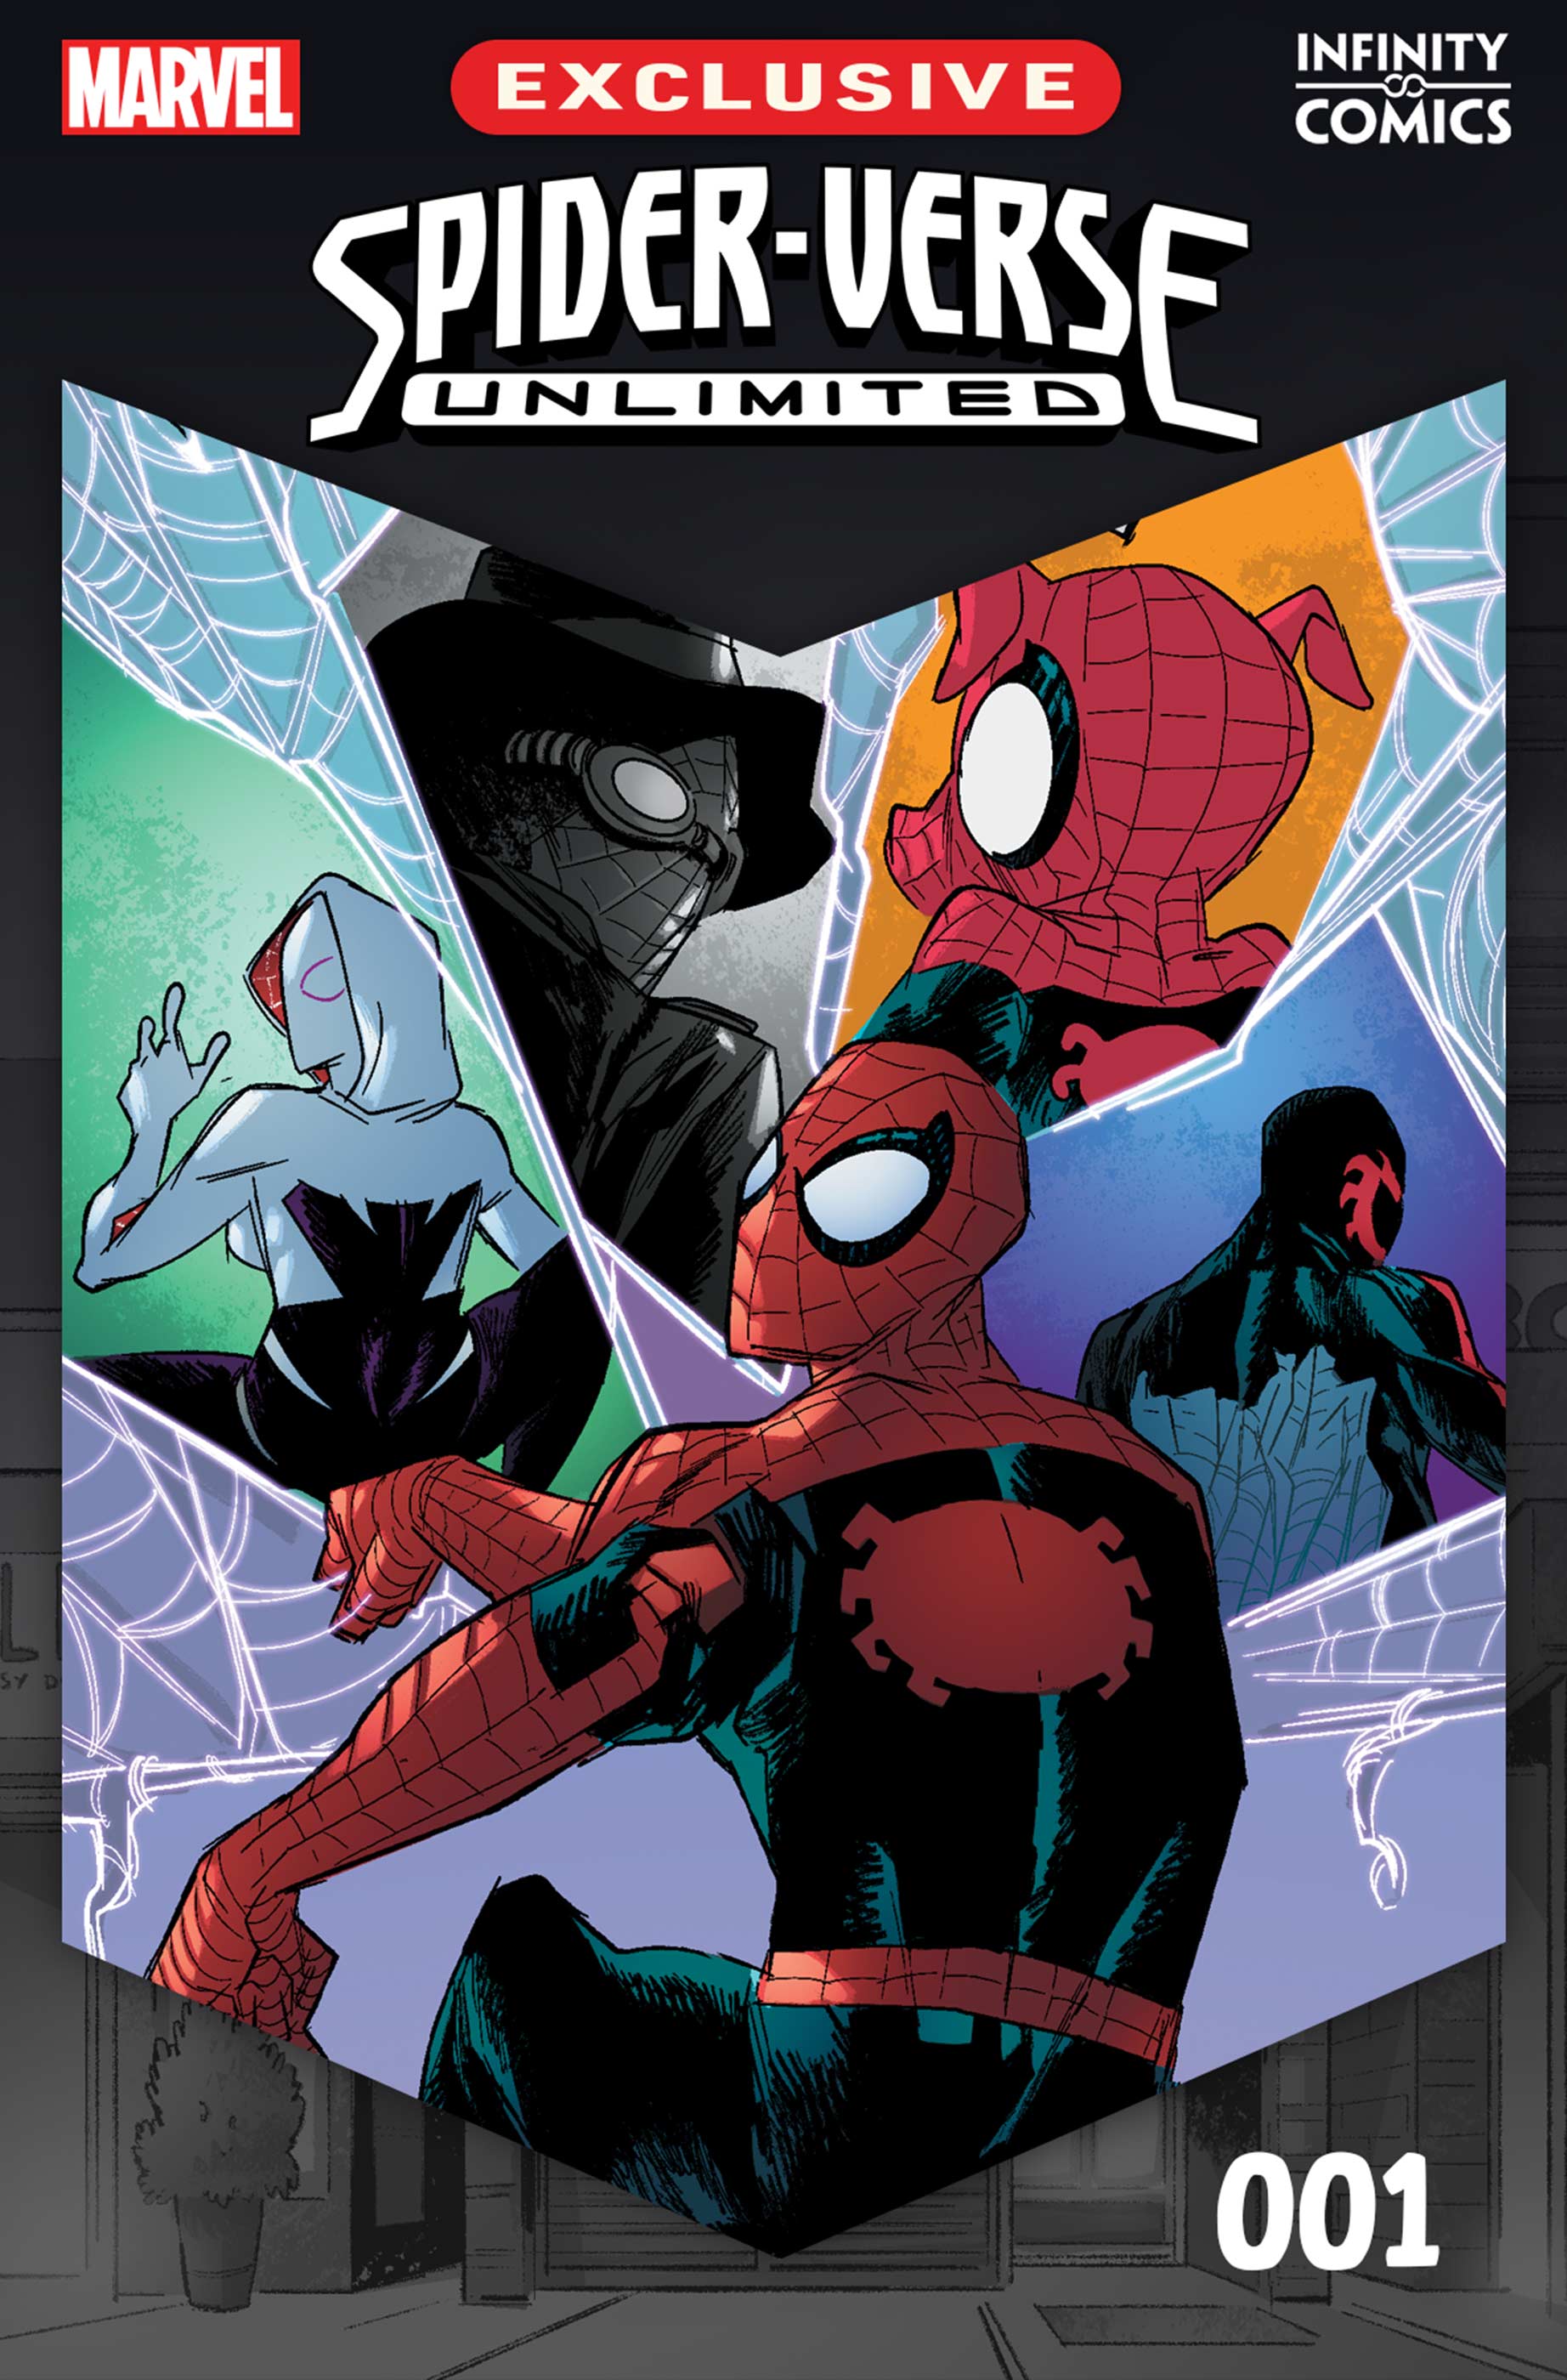 Spider-verse unlimited infinity comic